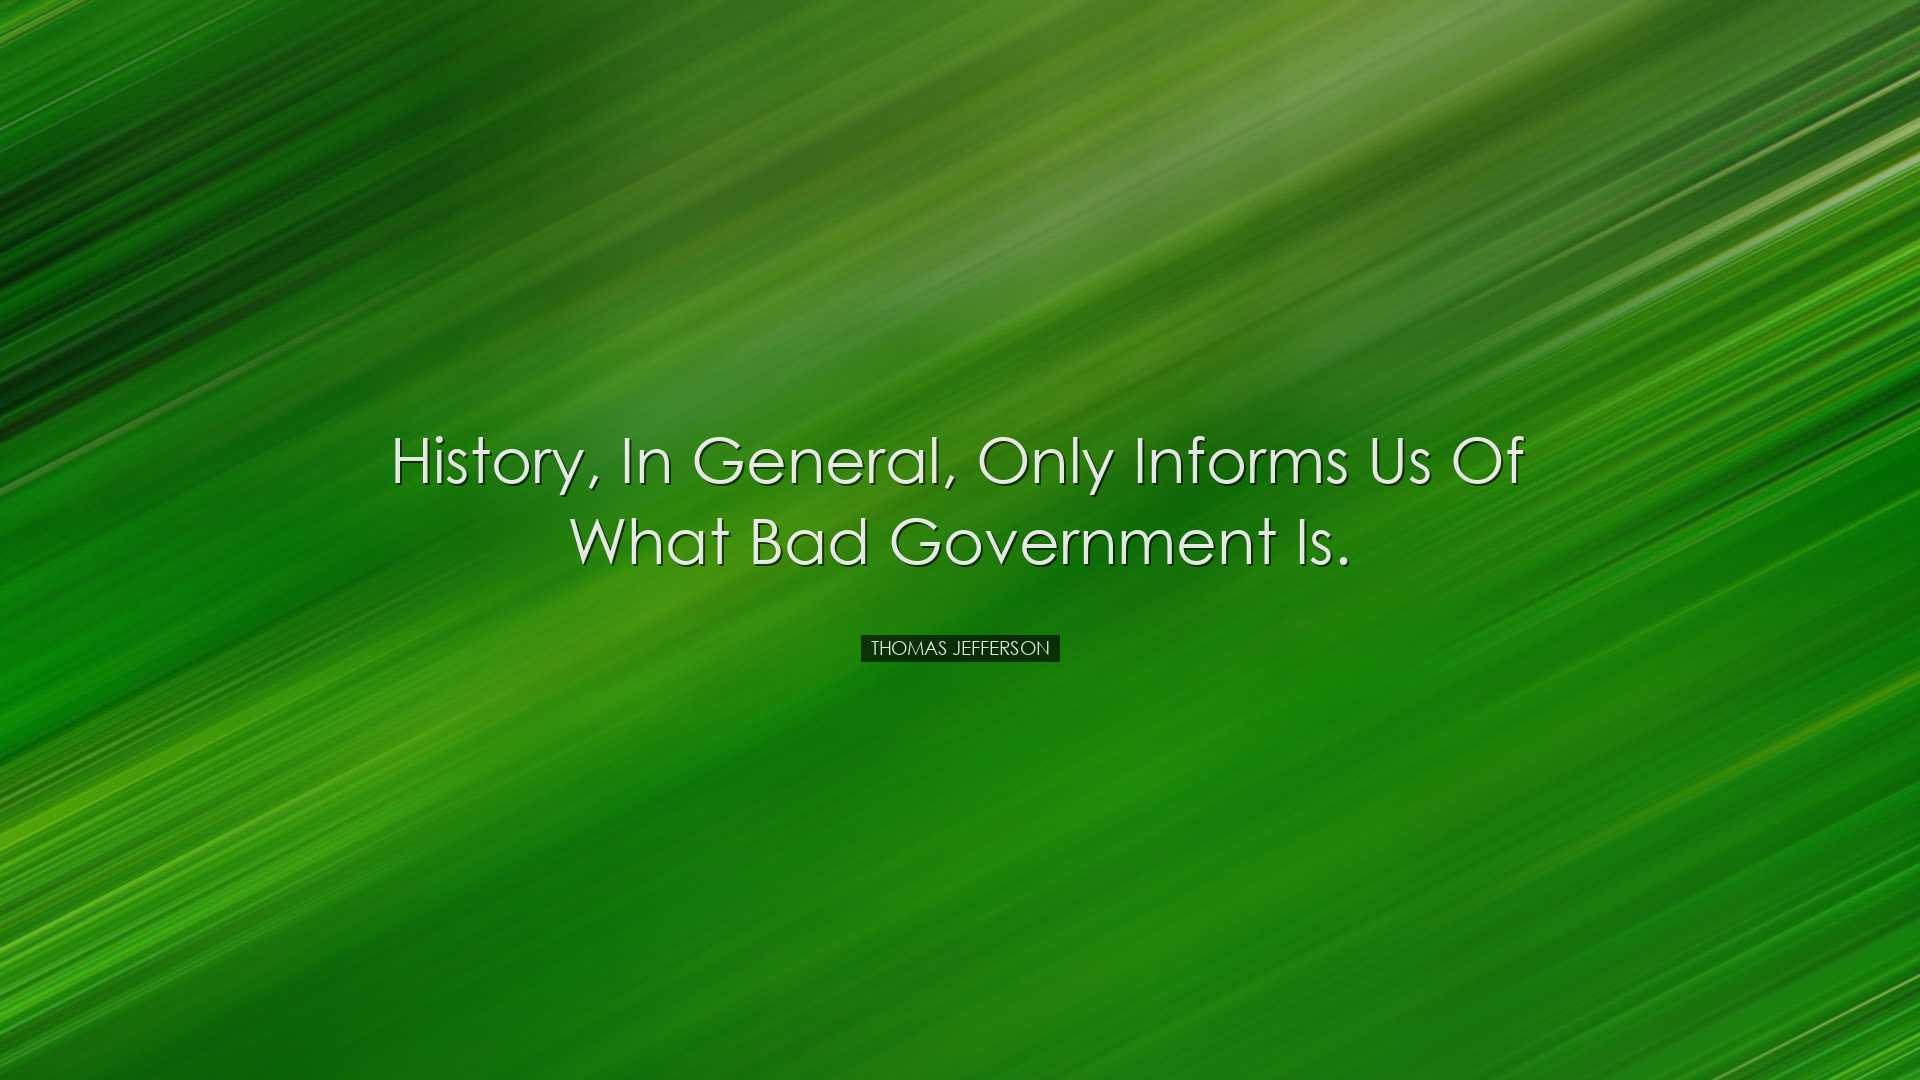 History, in general, only informs us of what bad government is. -